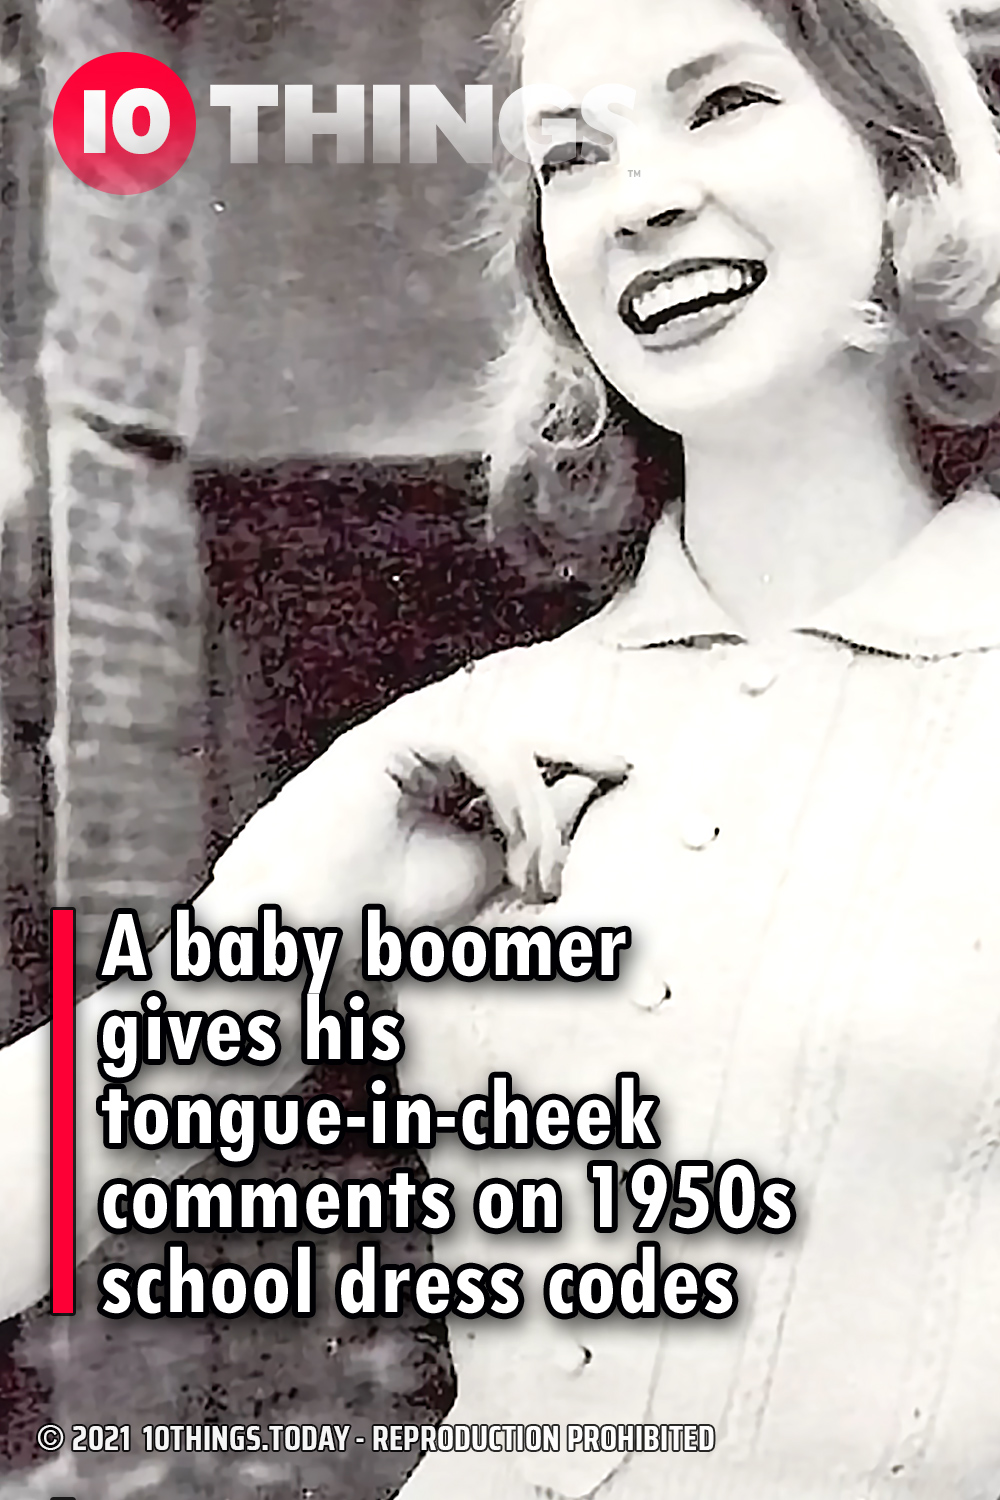 A baby boomer gives his tongue-in-cheek comments on 1950s school dress codes